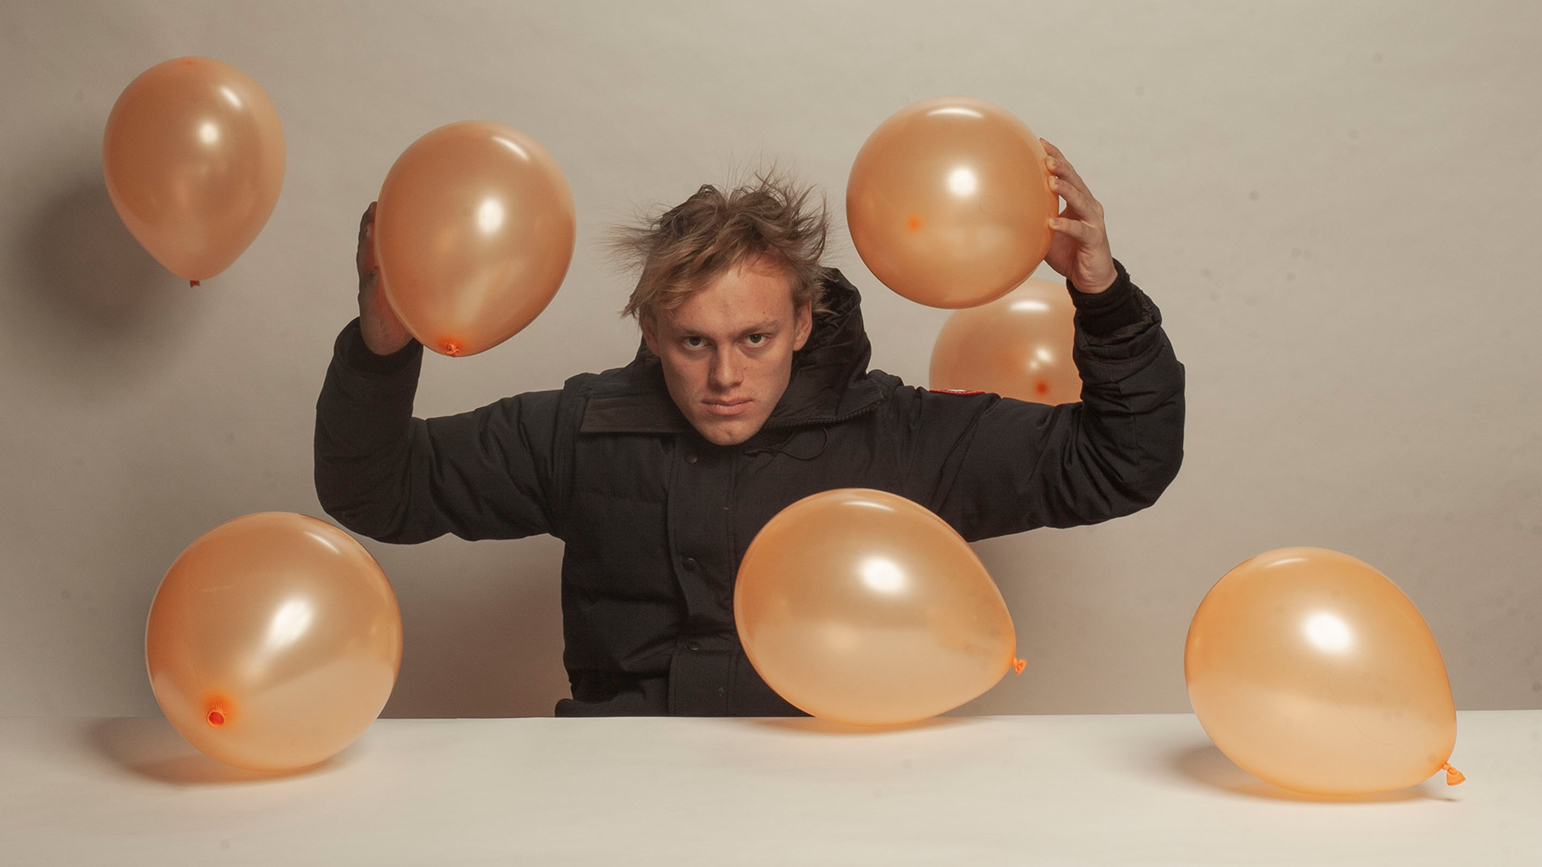 Photograph of Jackson Bridgers surrounded by balloons